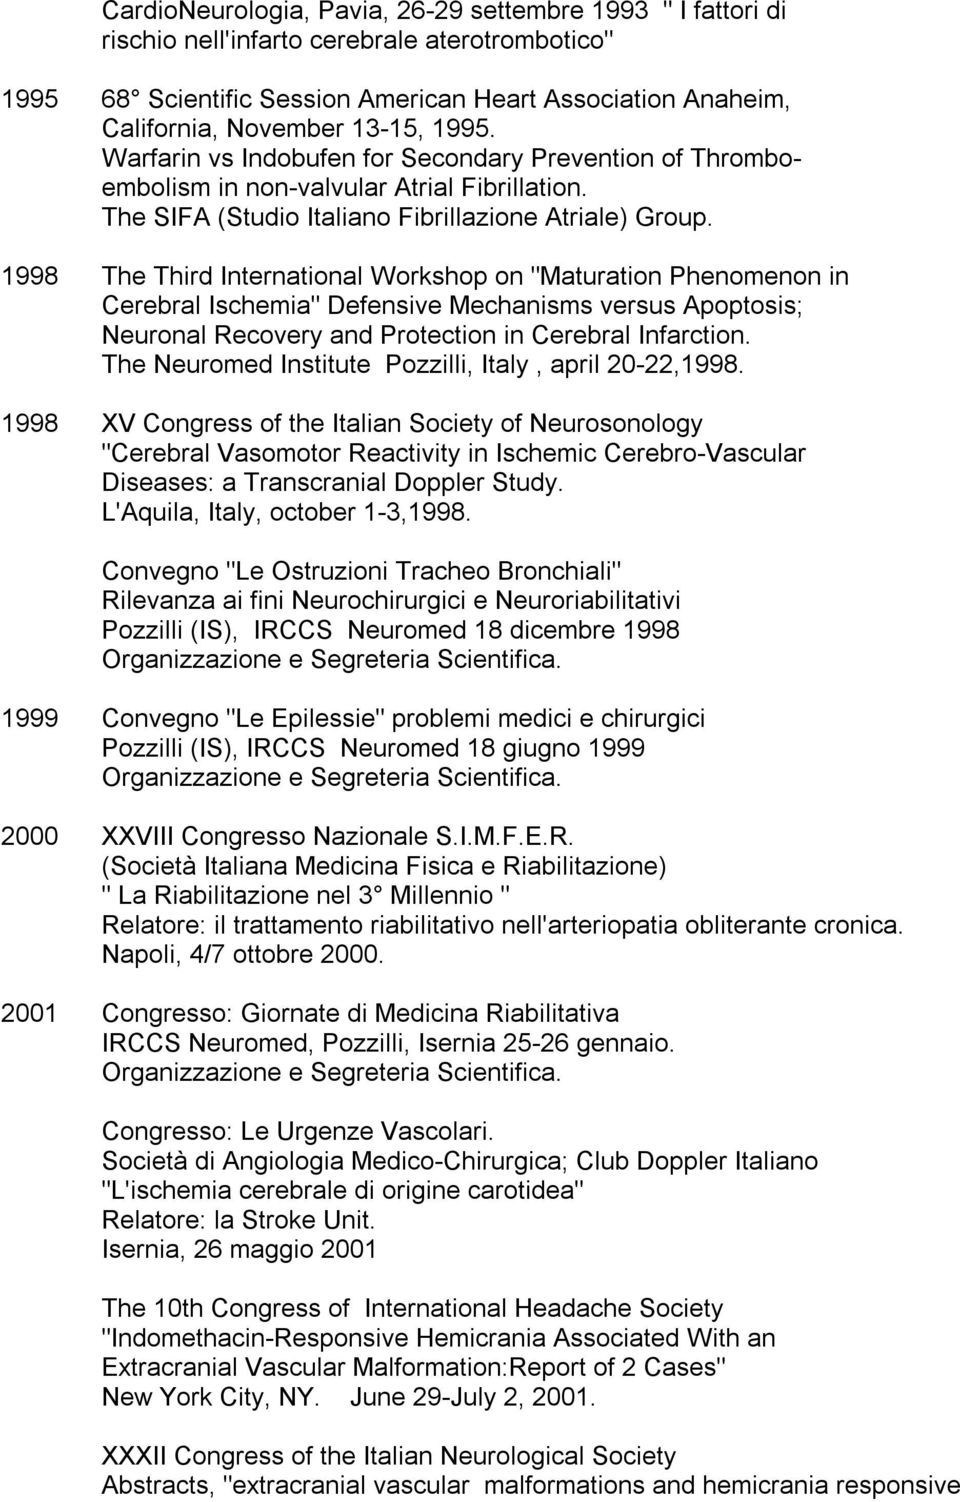 1998 The Third International Workshop on "Maturation Phenomenon in Cerebral Ischemia" Defensive Mechanisms versus Apoptosis; Neuronal Recovery and Protection in Cerebral Infarction.